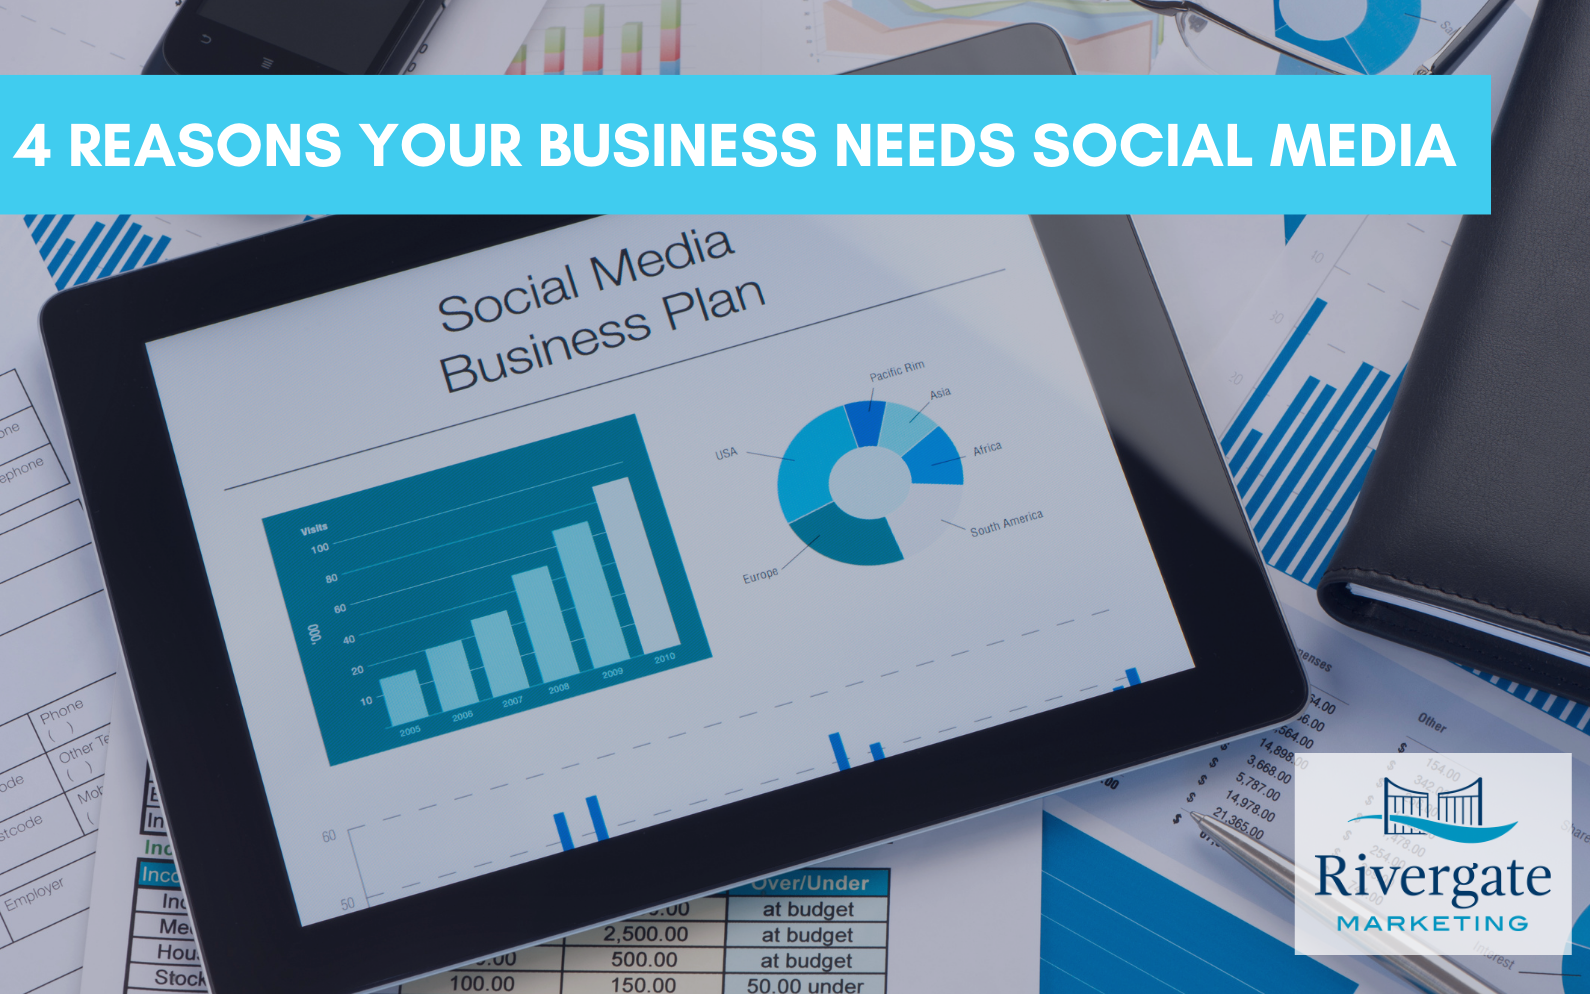 Rivergate Marketing Four Reasons Your Business Needs Social Media